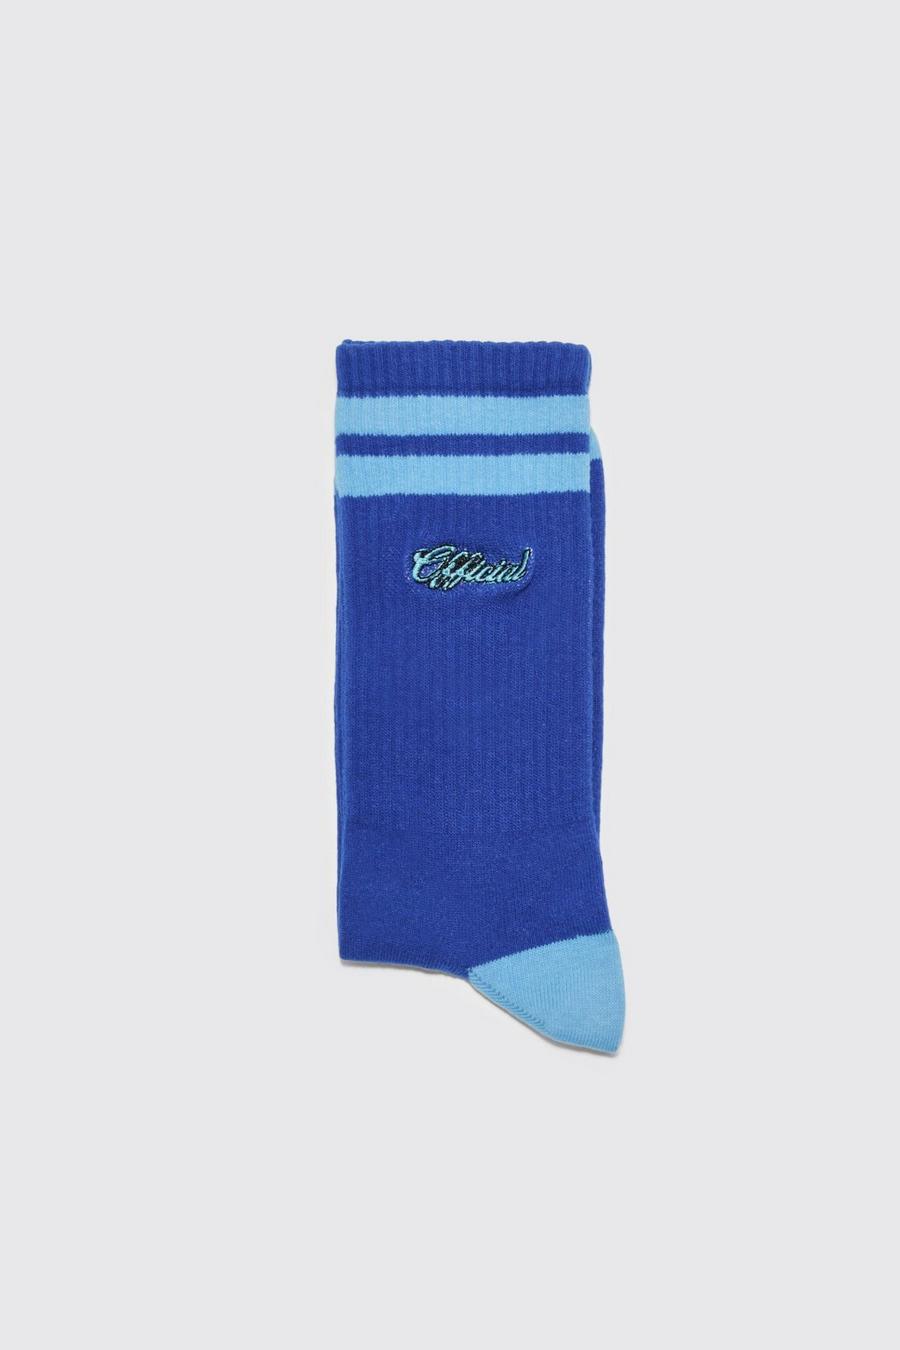 Navy azul marino Official Embroidered Sports Stripe Socks